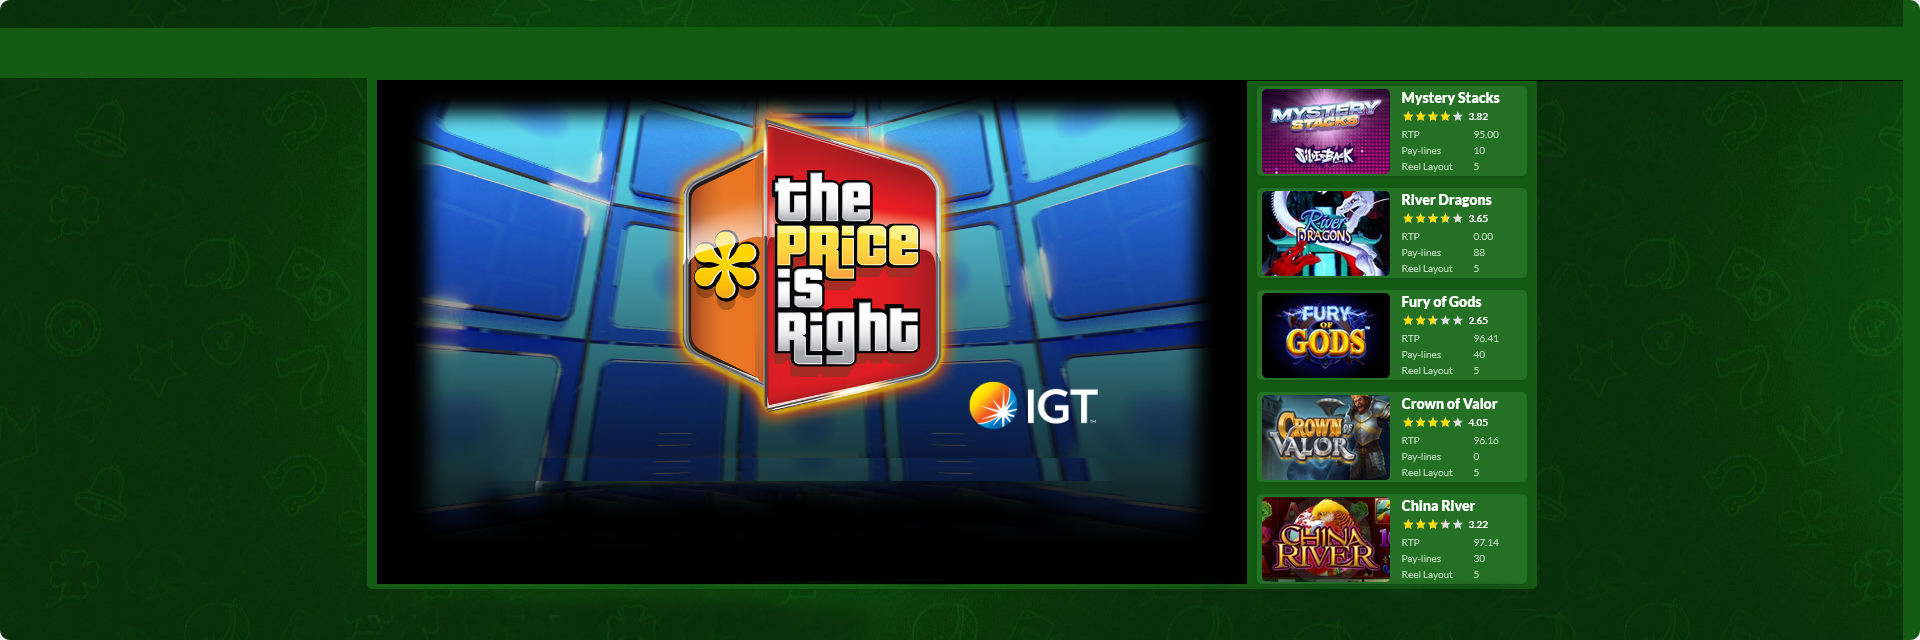 The Price is right online slot logo. 